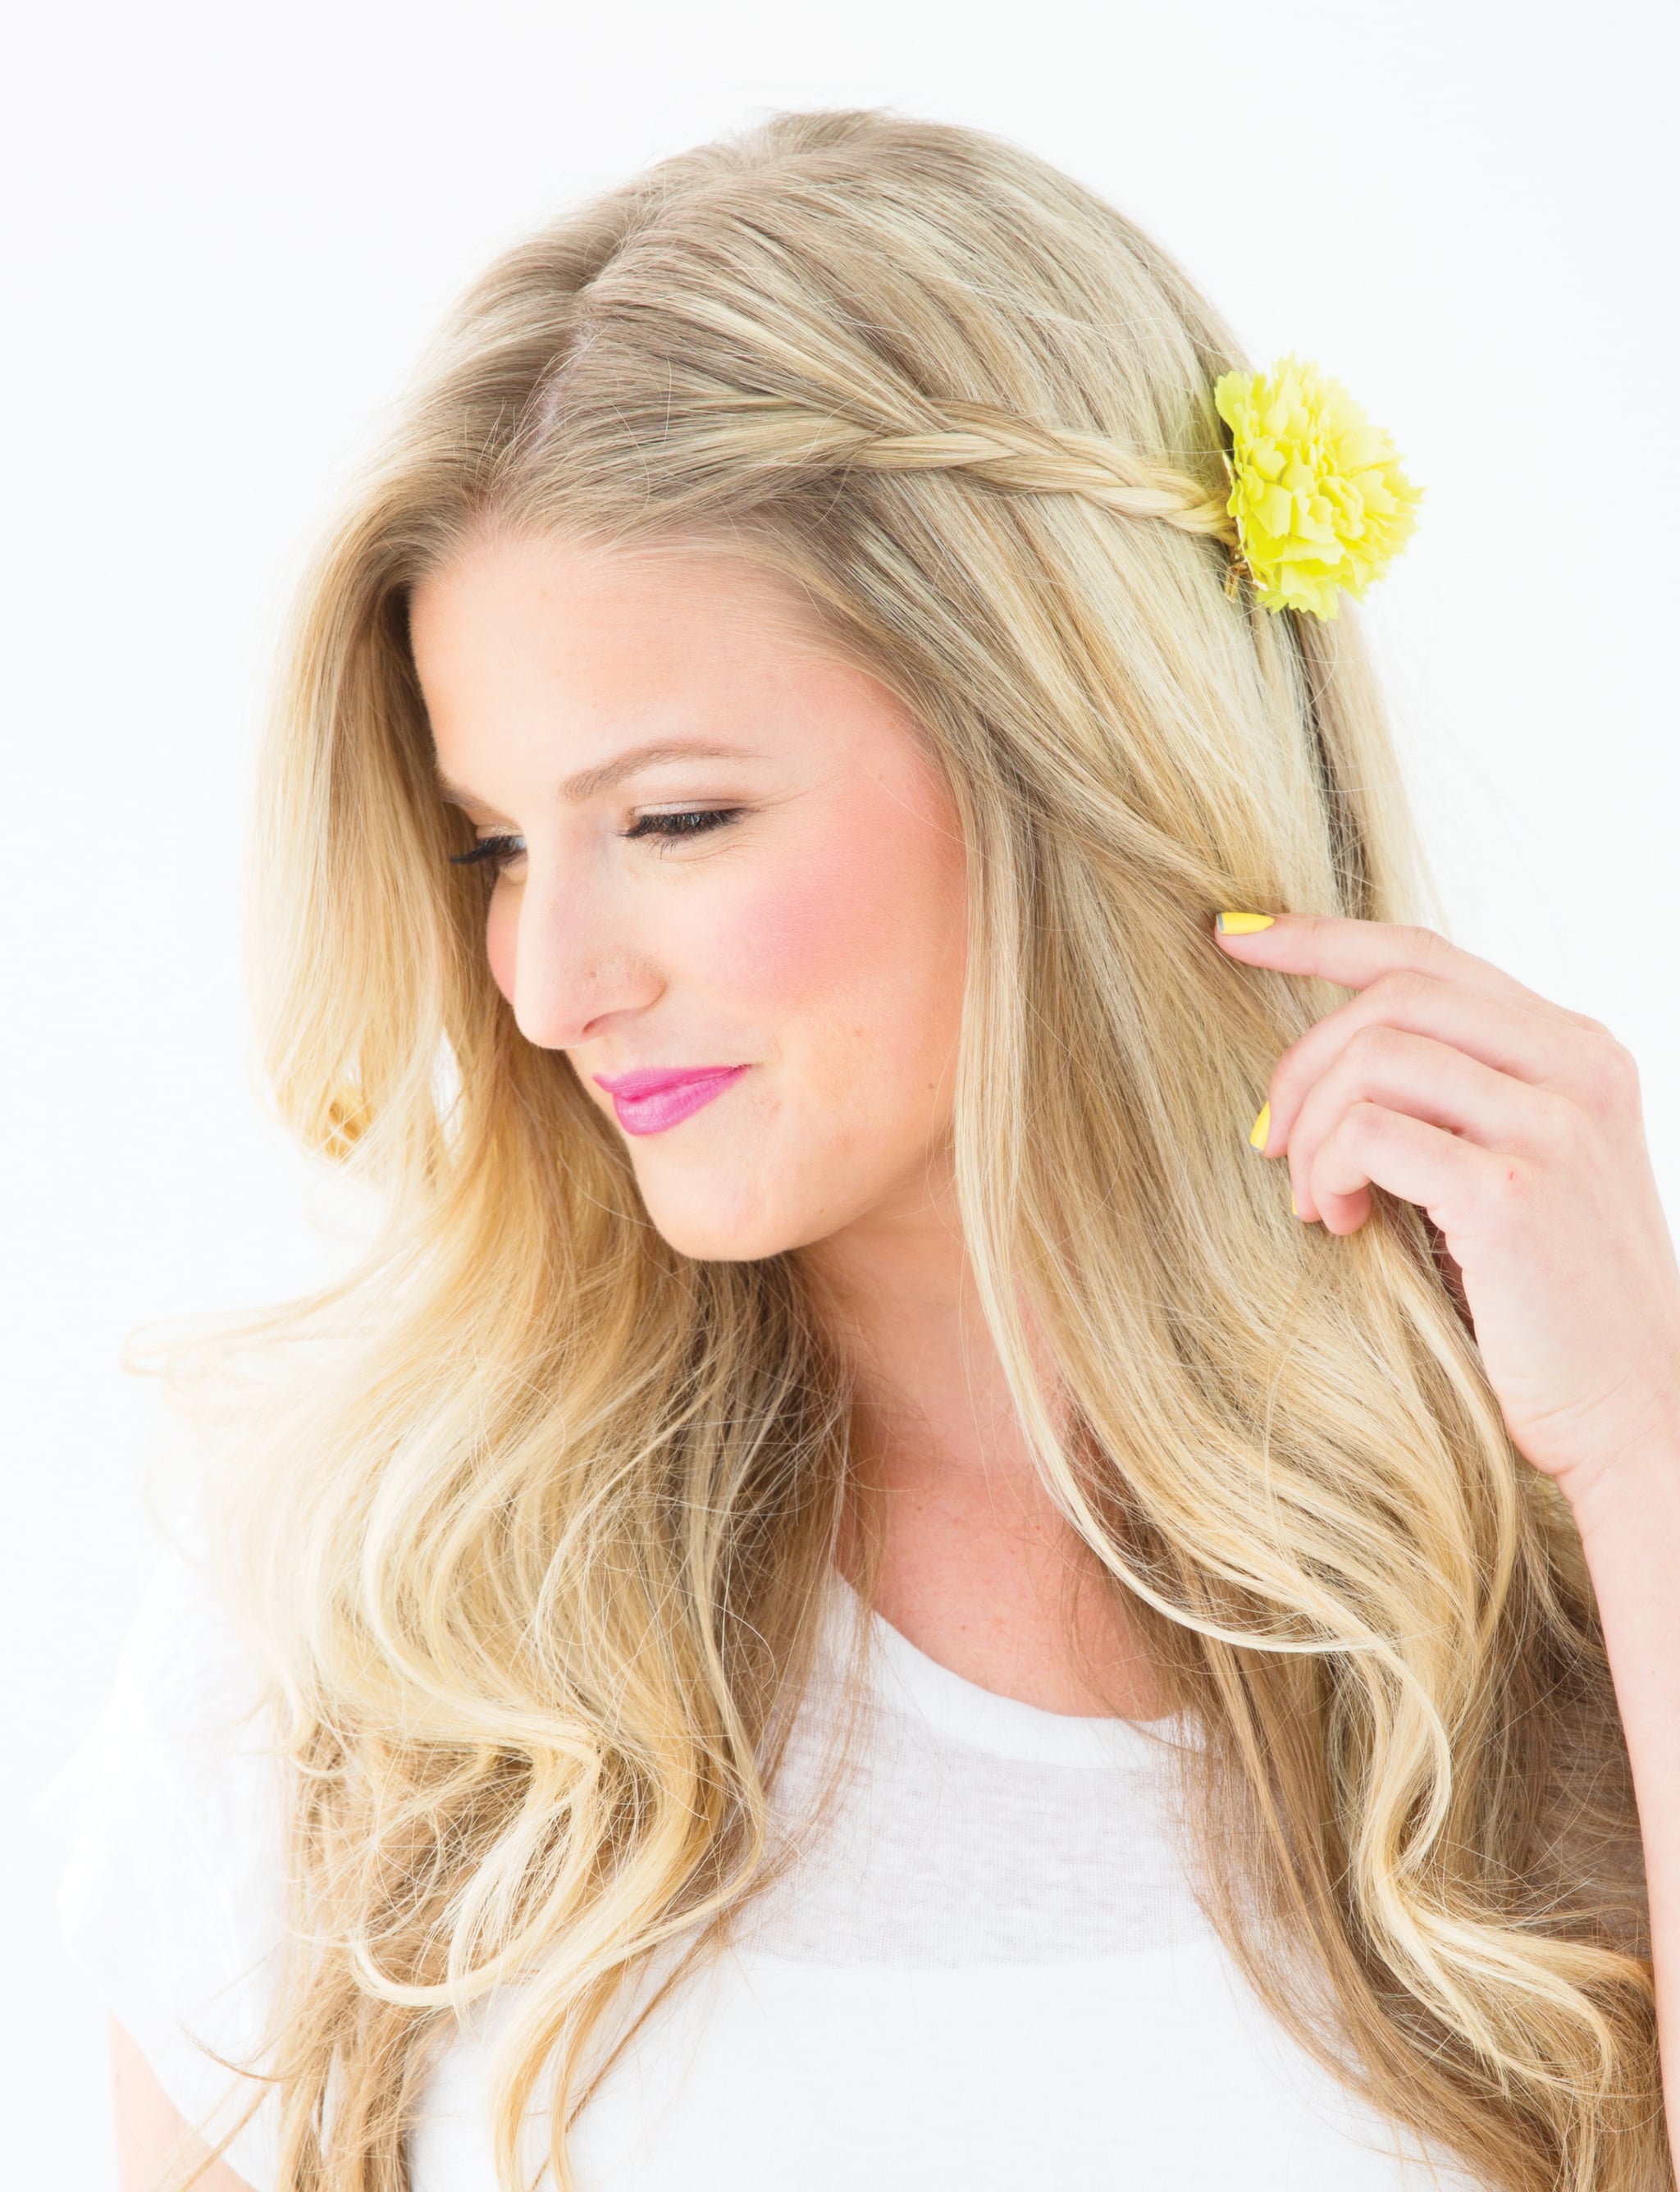 Accent Braid | You Have to See the Dreamy New Braids Offered at Drybar |  POPSUGAR Beauty Photo 4